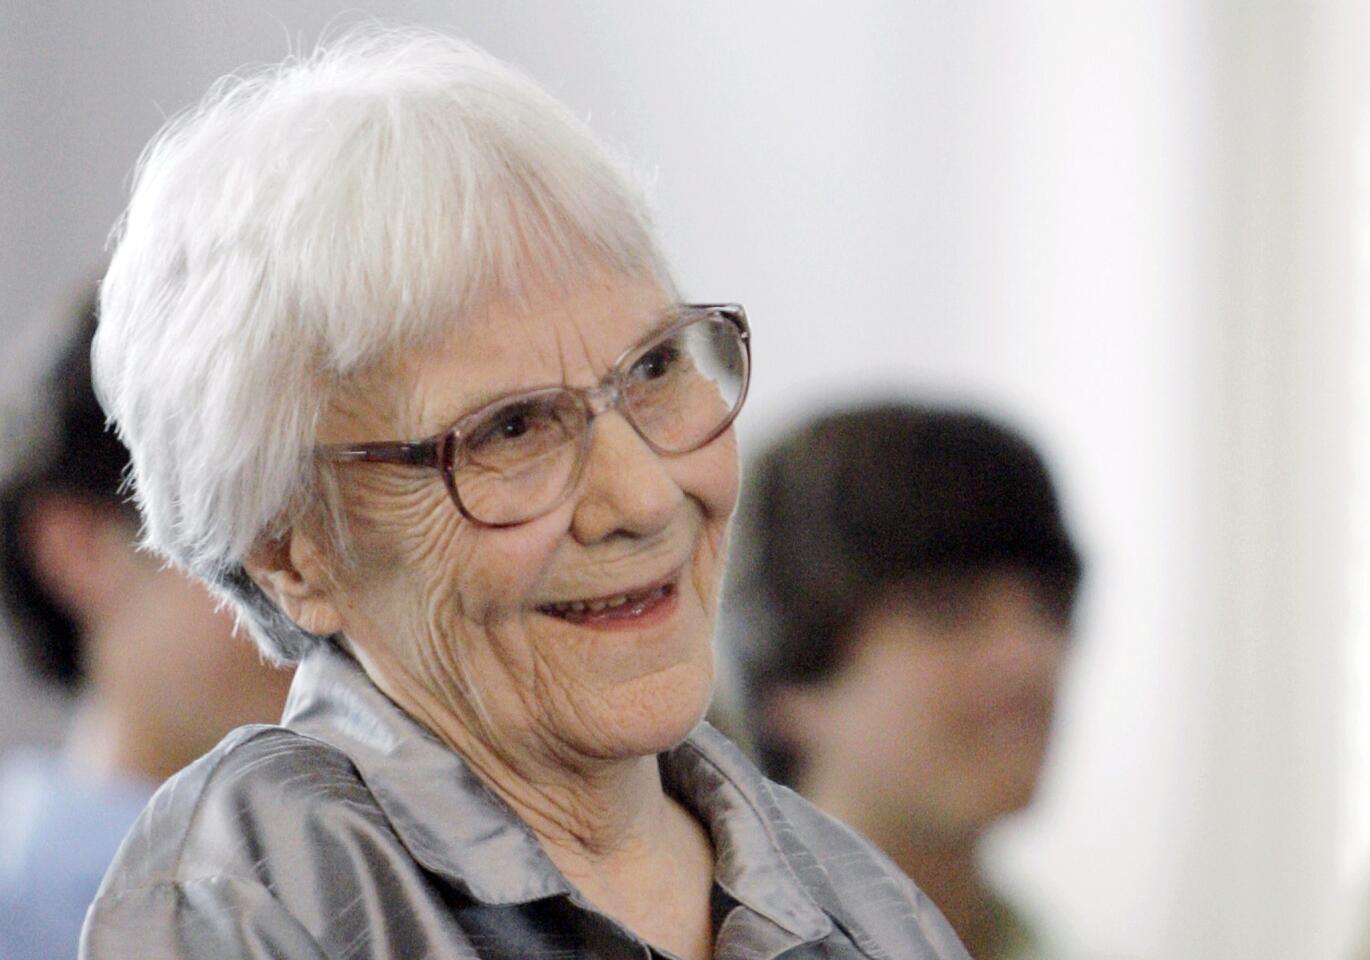 Harper Lee waited 55 years after publishing her first and only book, "To Kill a Mockingbird," before announcing a second novel. "Go Set a Watchman" arrives in July.